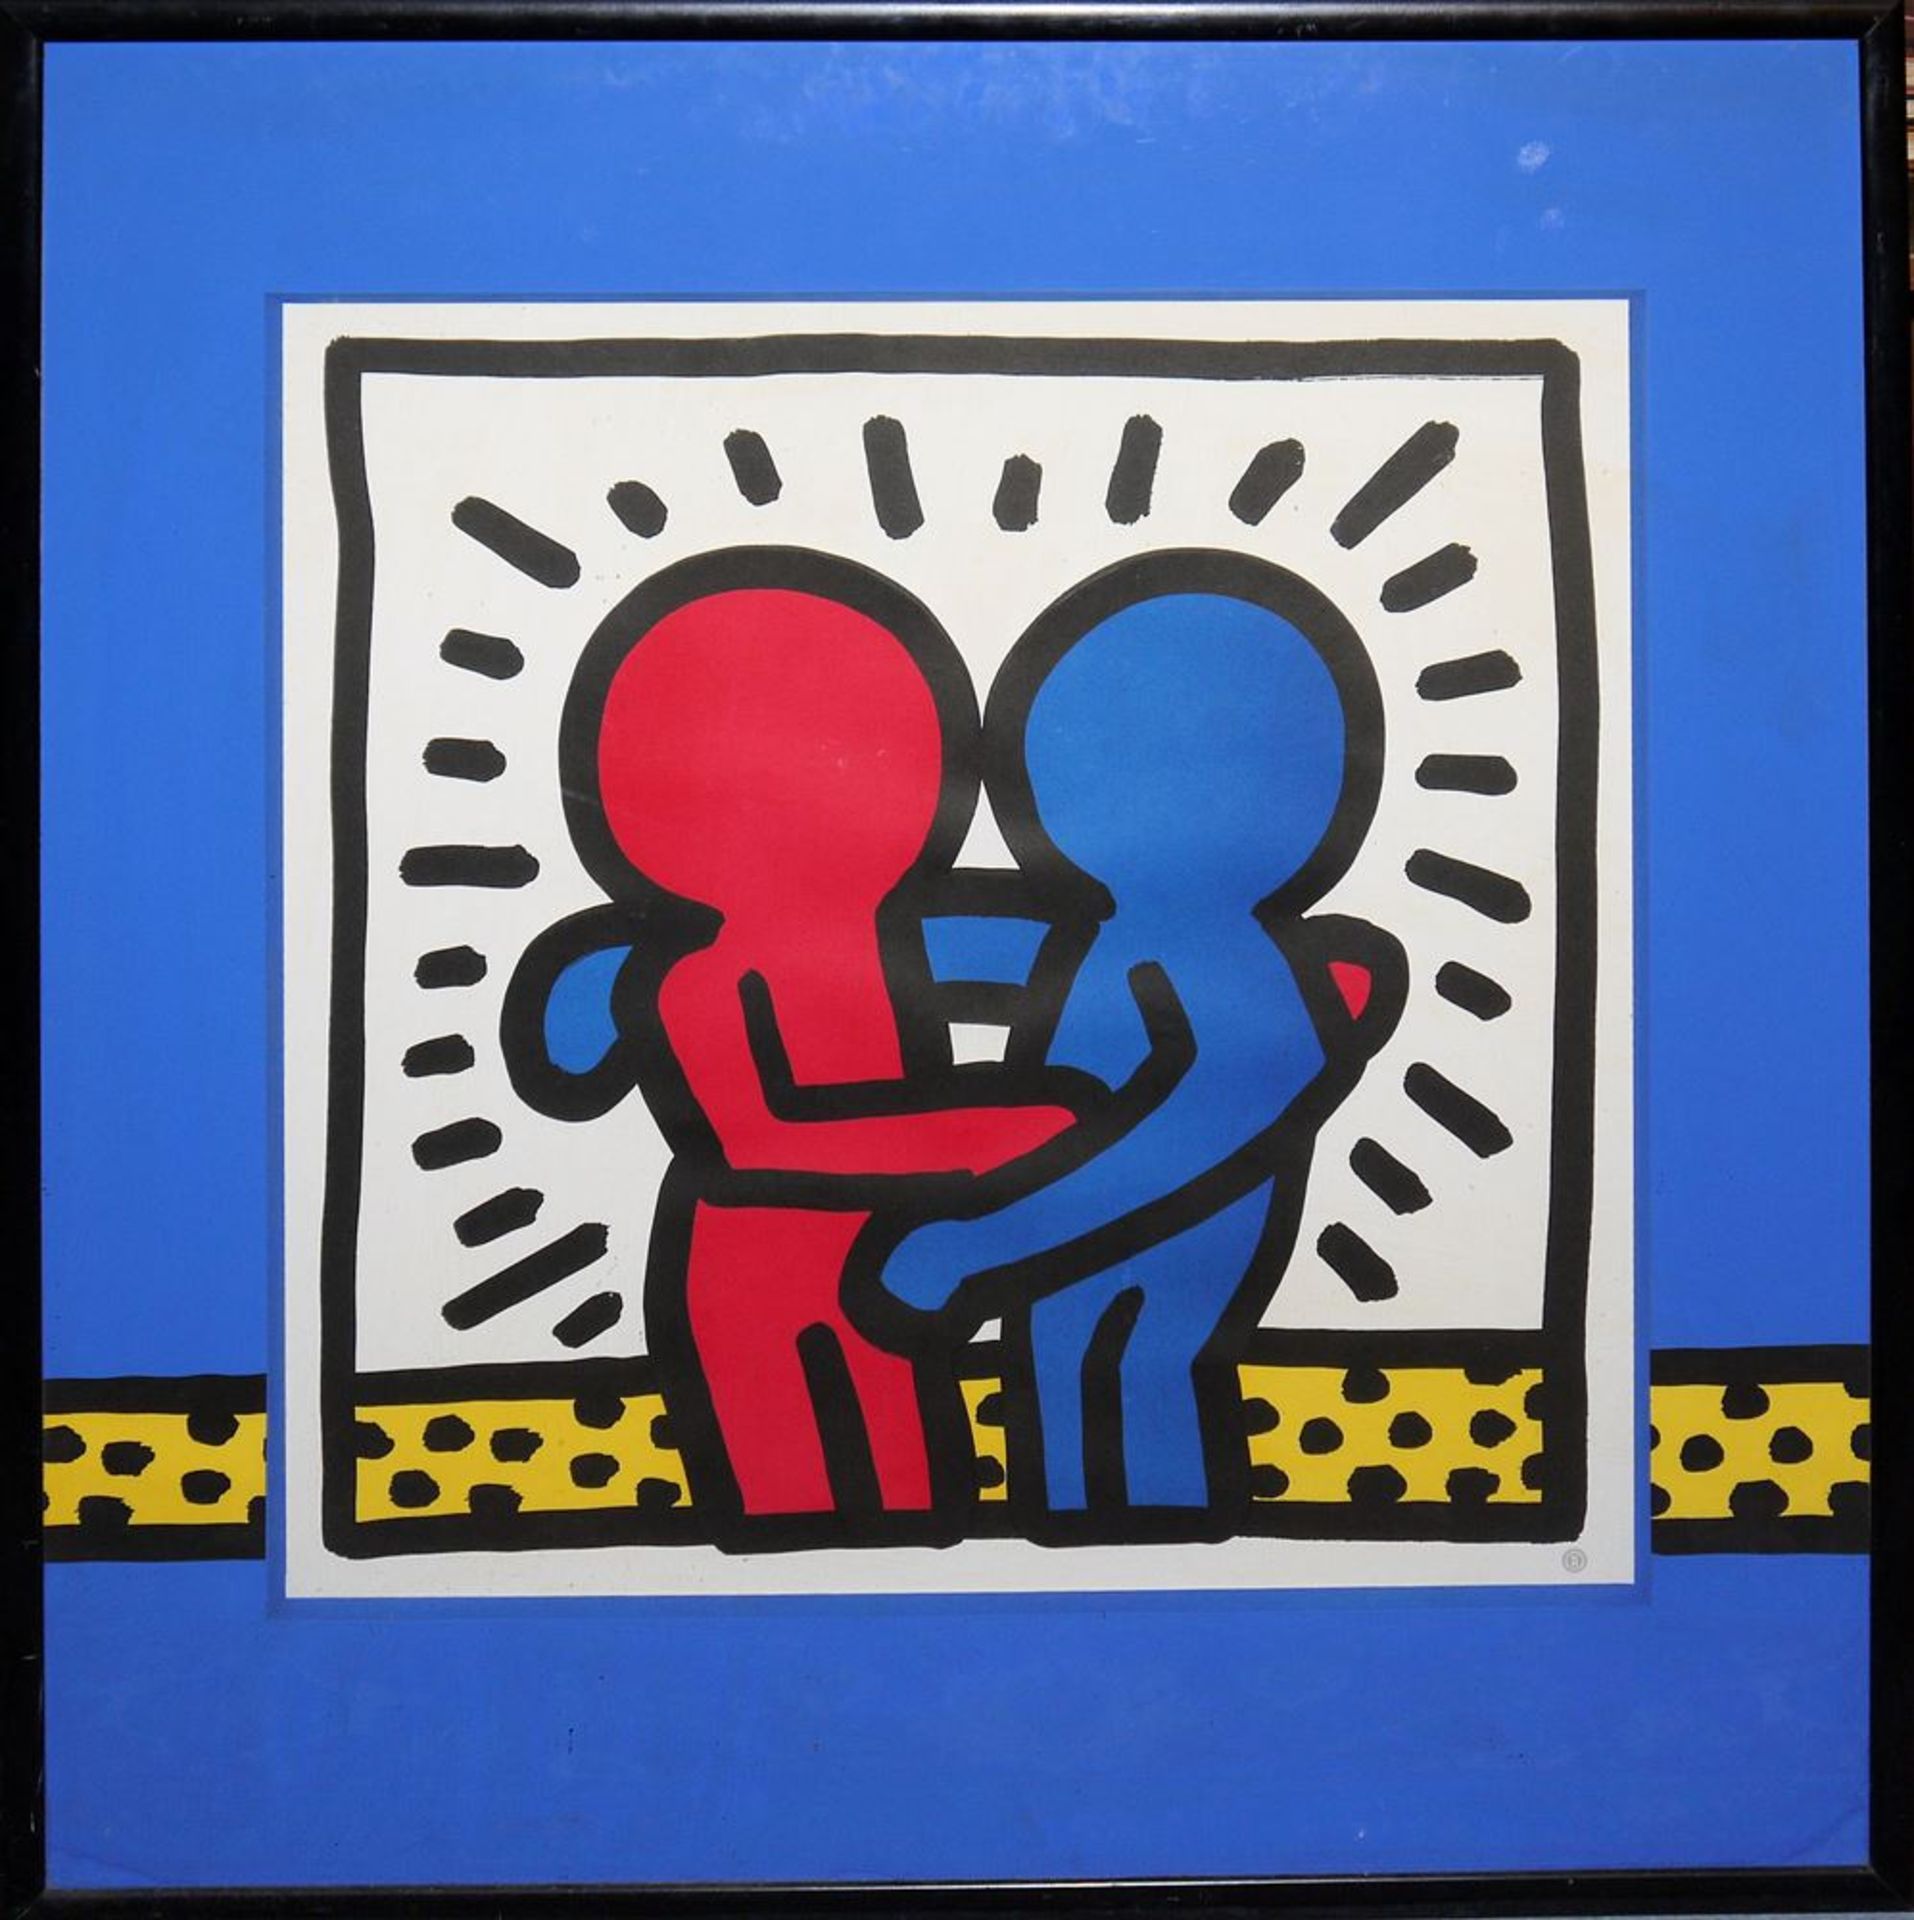 Keith Haring, Umarmung/Embrace "Without you", 3D-Farbserigraphie, gerahmt